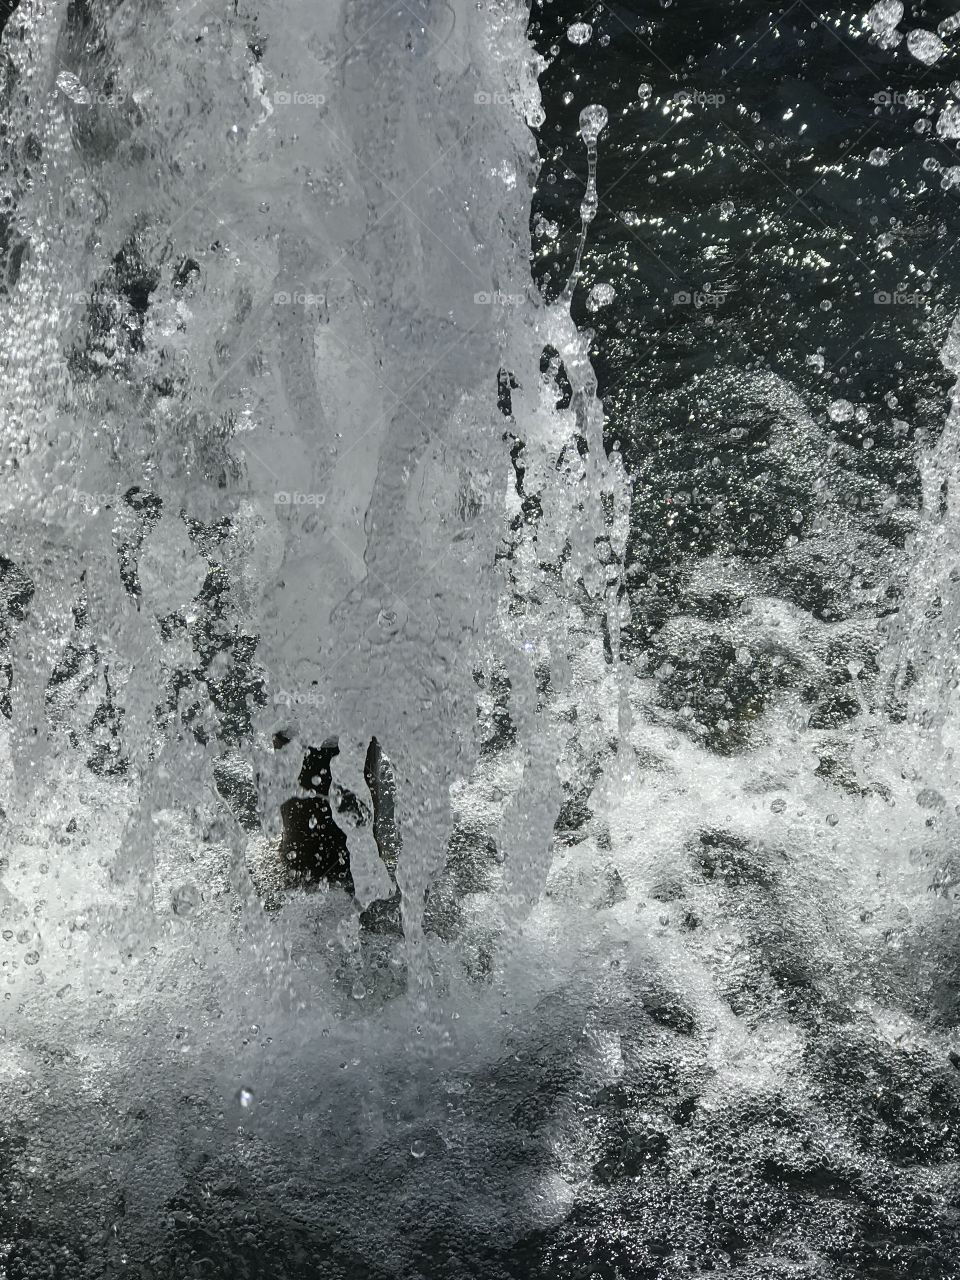 water in motion